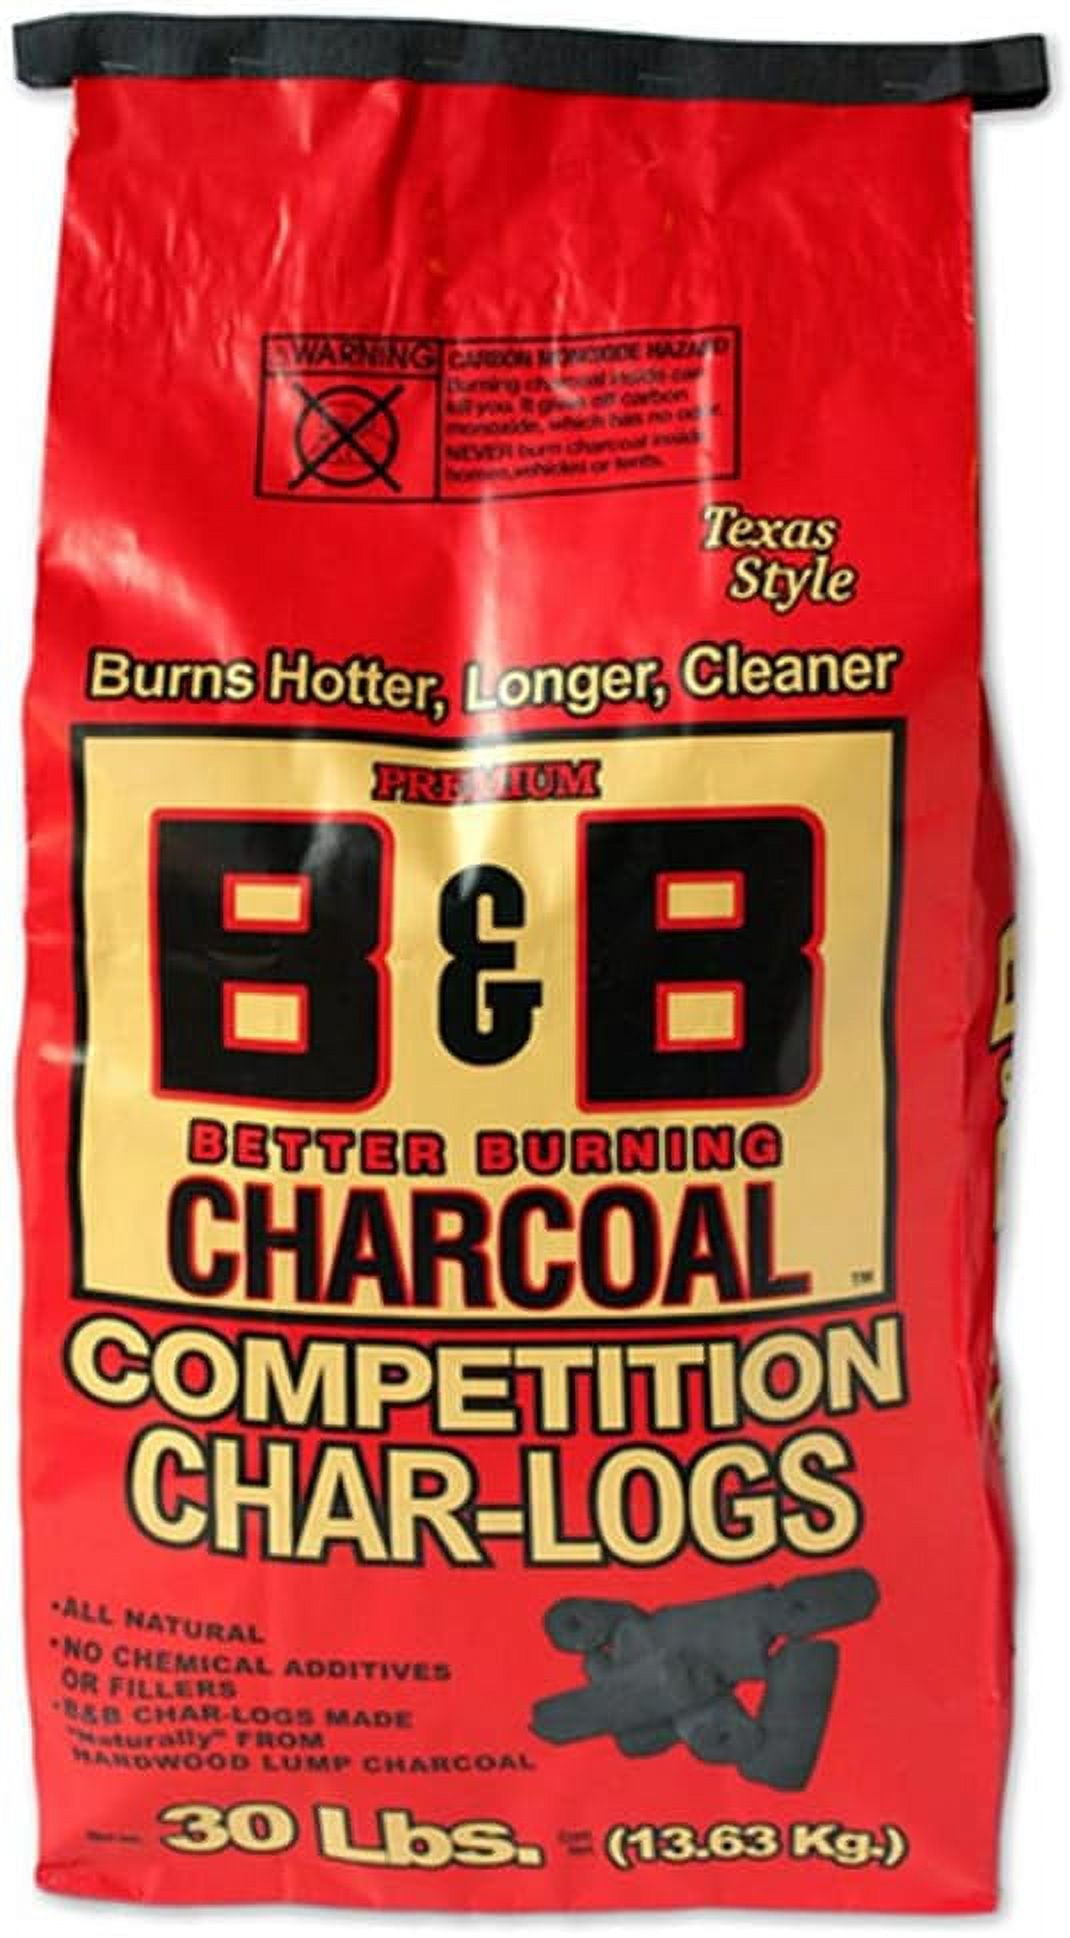 of B&B - Charcoal Lbs Competition Charcoal 00106 Char-logs 30 Briquettes, 4 Set